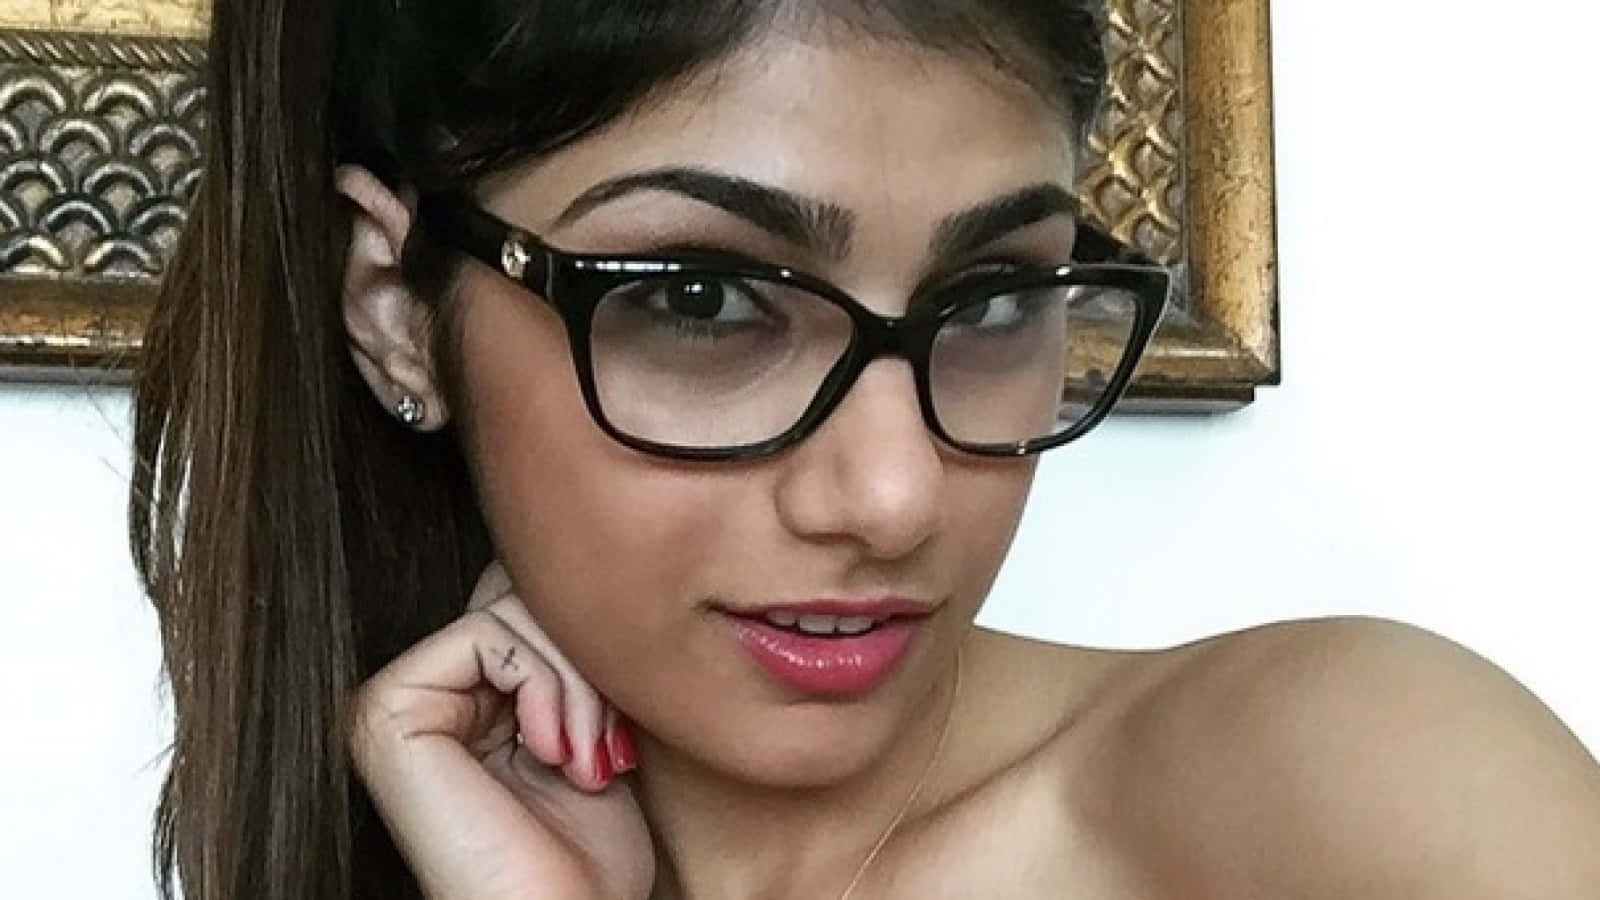 A Young Woman In Glasses Posing For A Photo